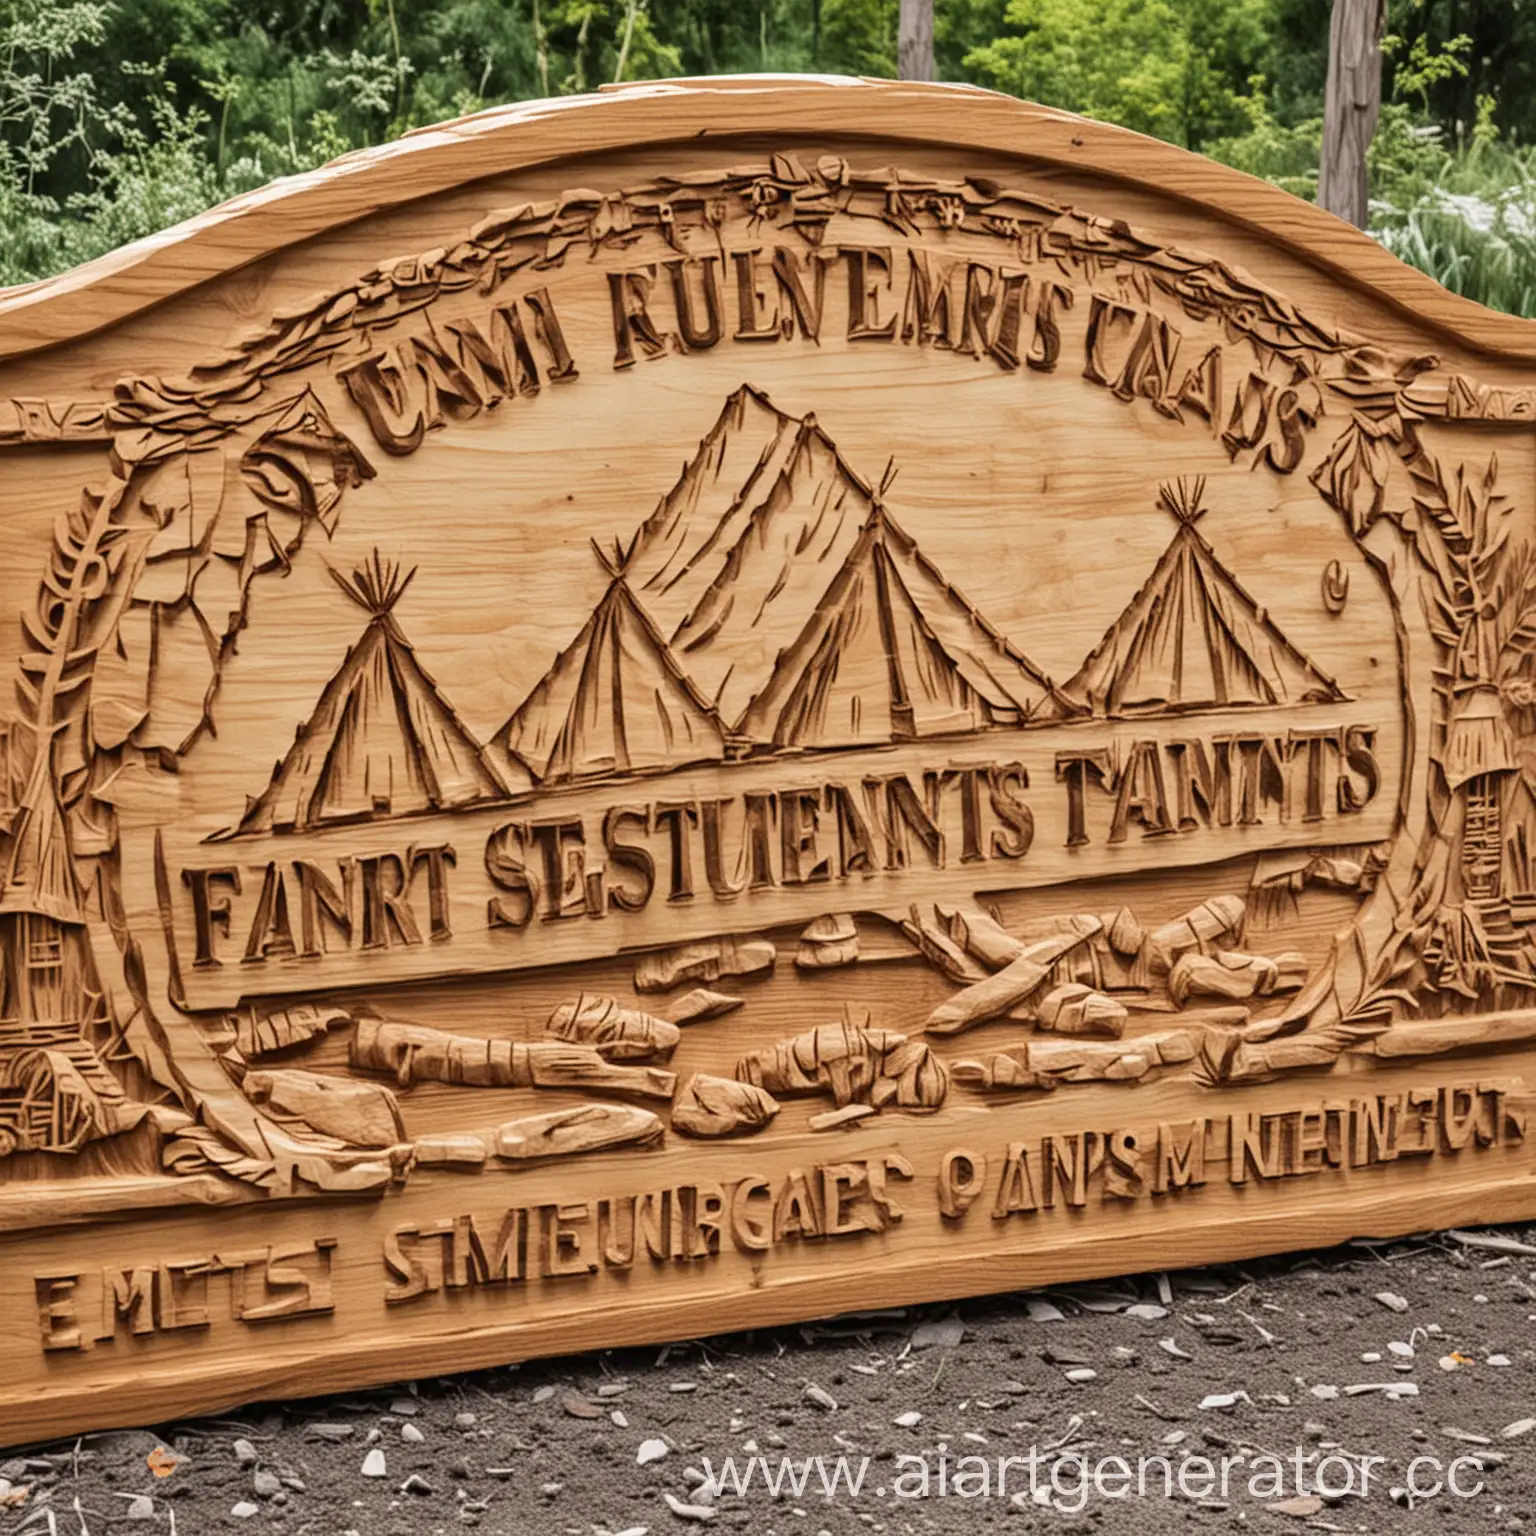 Wooden-Carved-Entry-Sign-Depicting-Tents